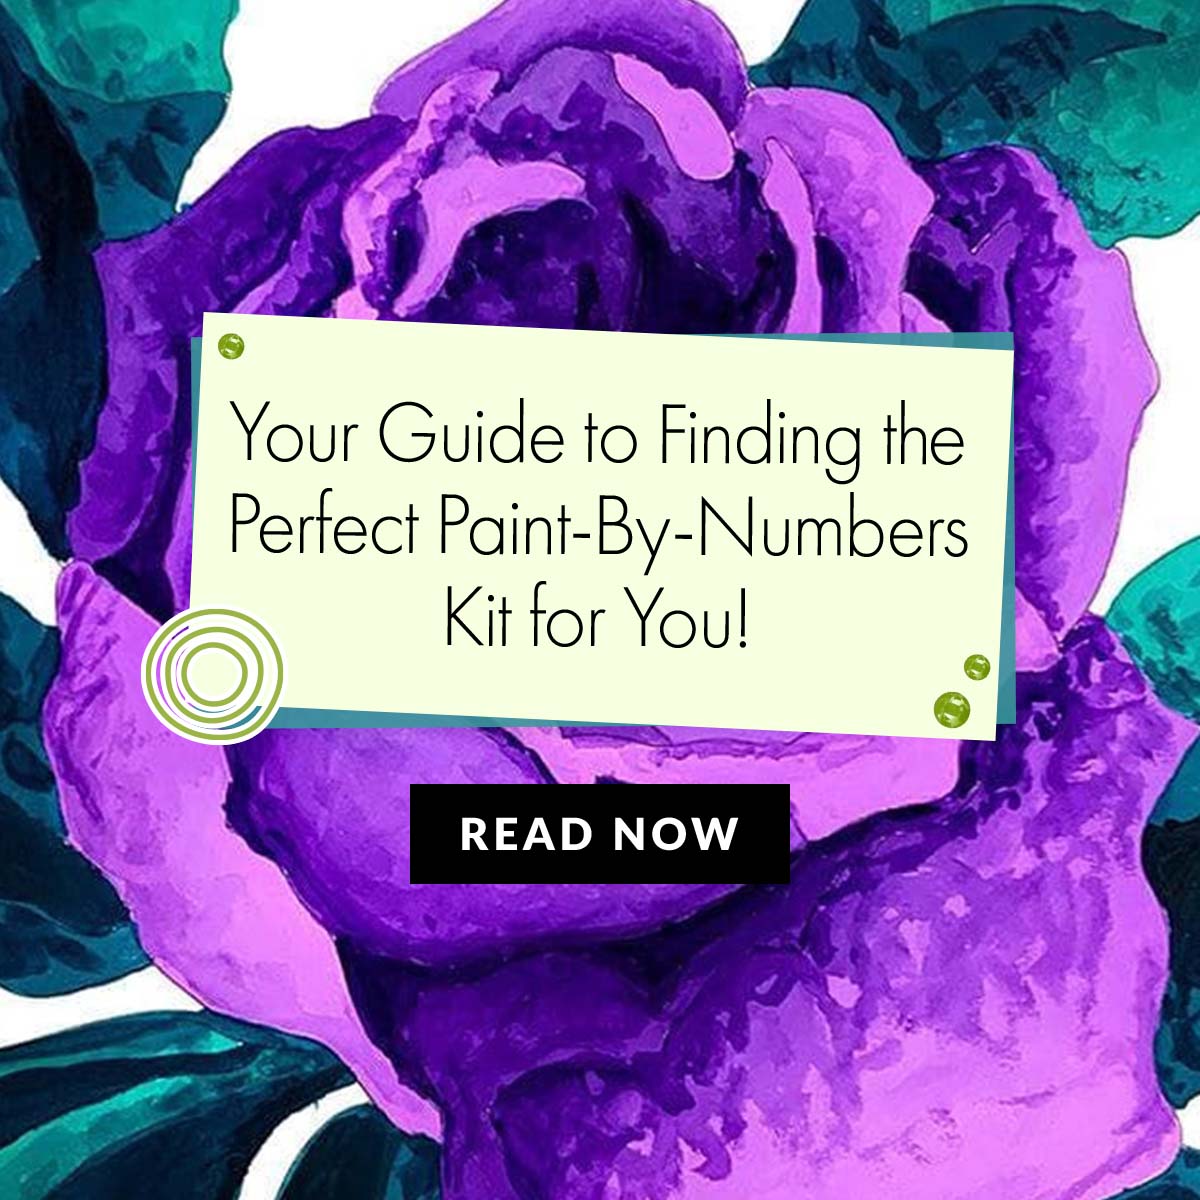 5 Things to Consider to Find the Perfect Paint-by-Numbers Kit for You